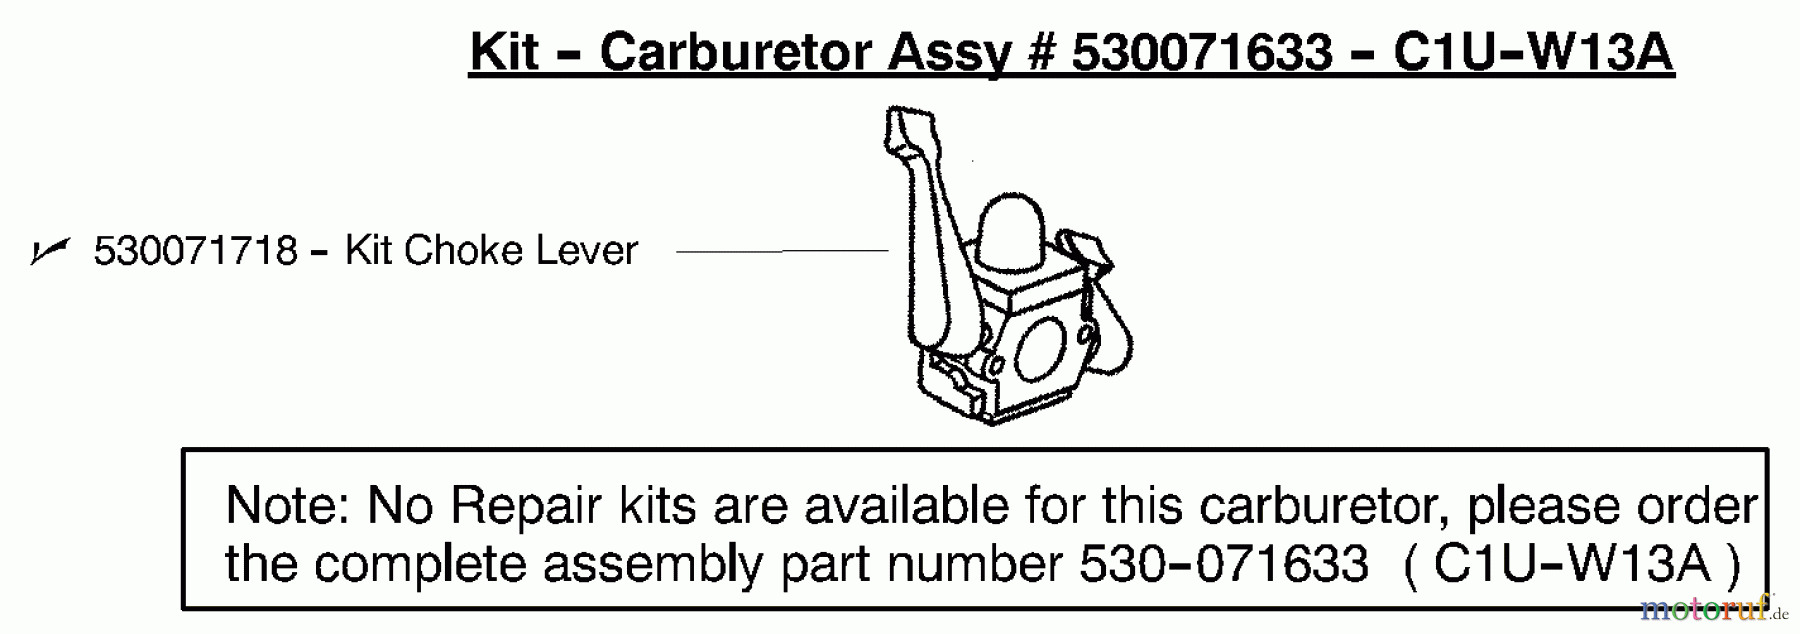  Poulan / Weed Eater Heckenscheren GHT180LE (Type 3) - Weed Eater Hedge Trimmer Carburetor Assembly (C1U-W13A) PN 530071633